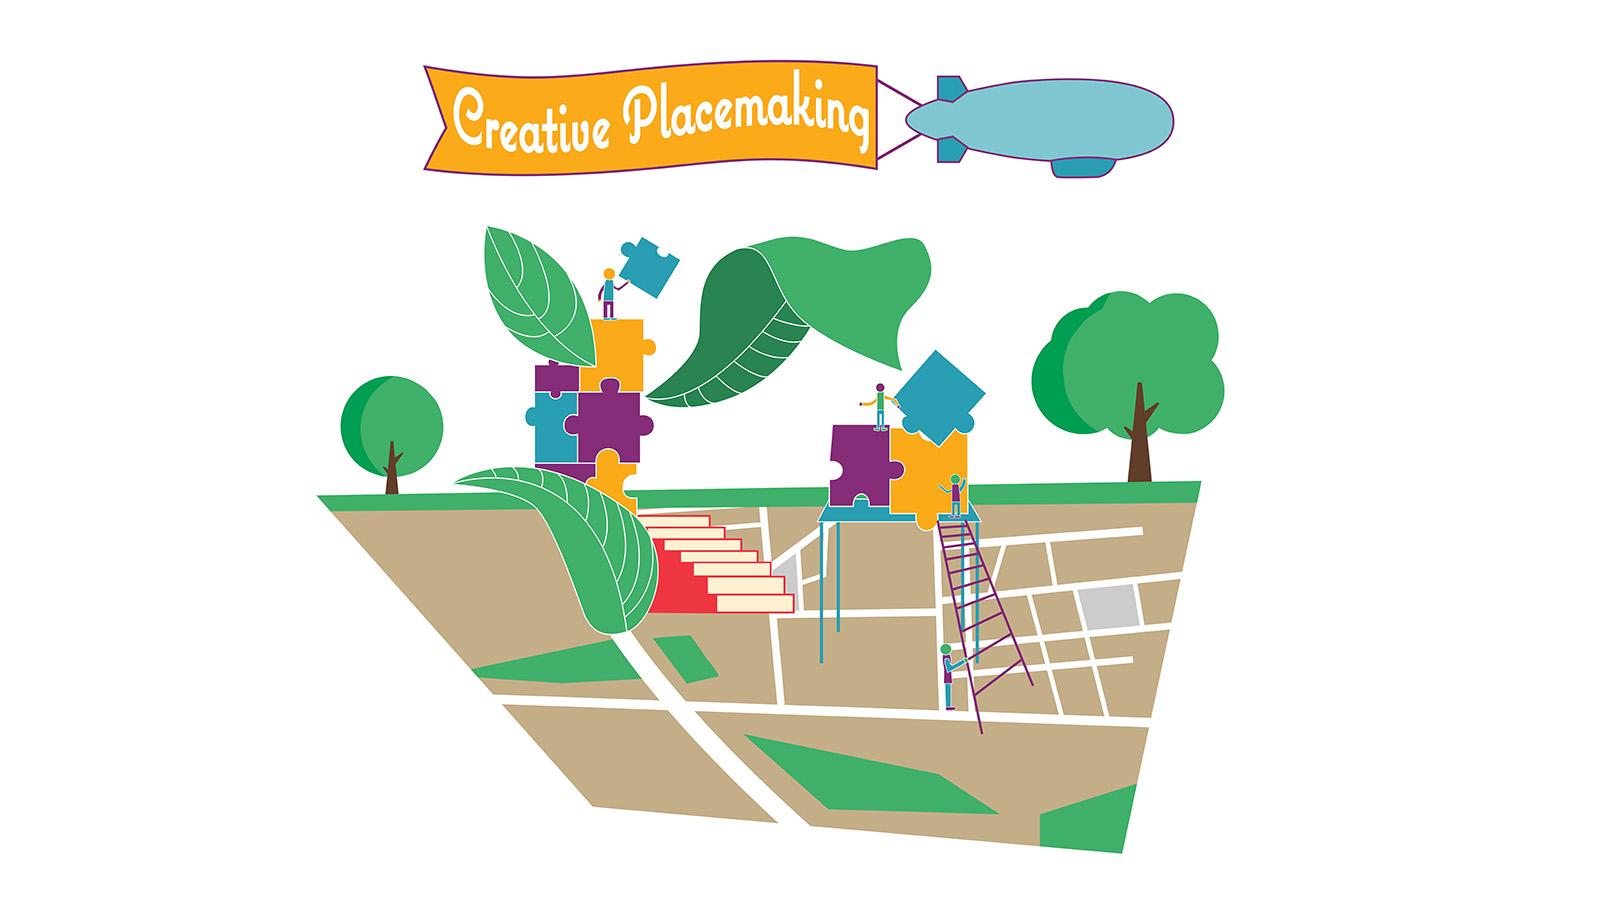 Illustration of creative placemaking. People on ladders building large puzzles; leaves and trees in the background and a hot air balloon pulling a "Creative Placemaking" sign.